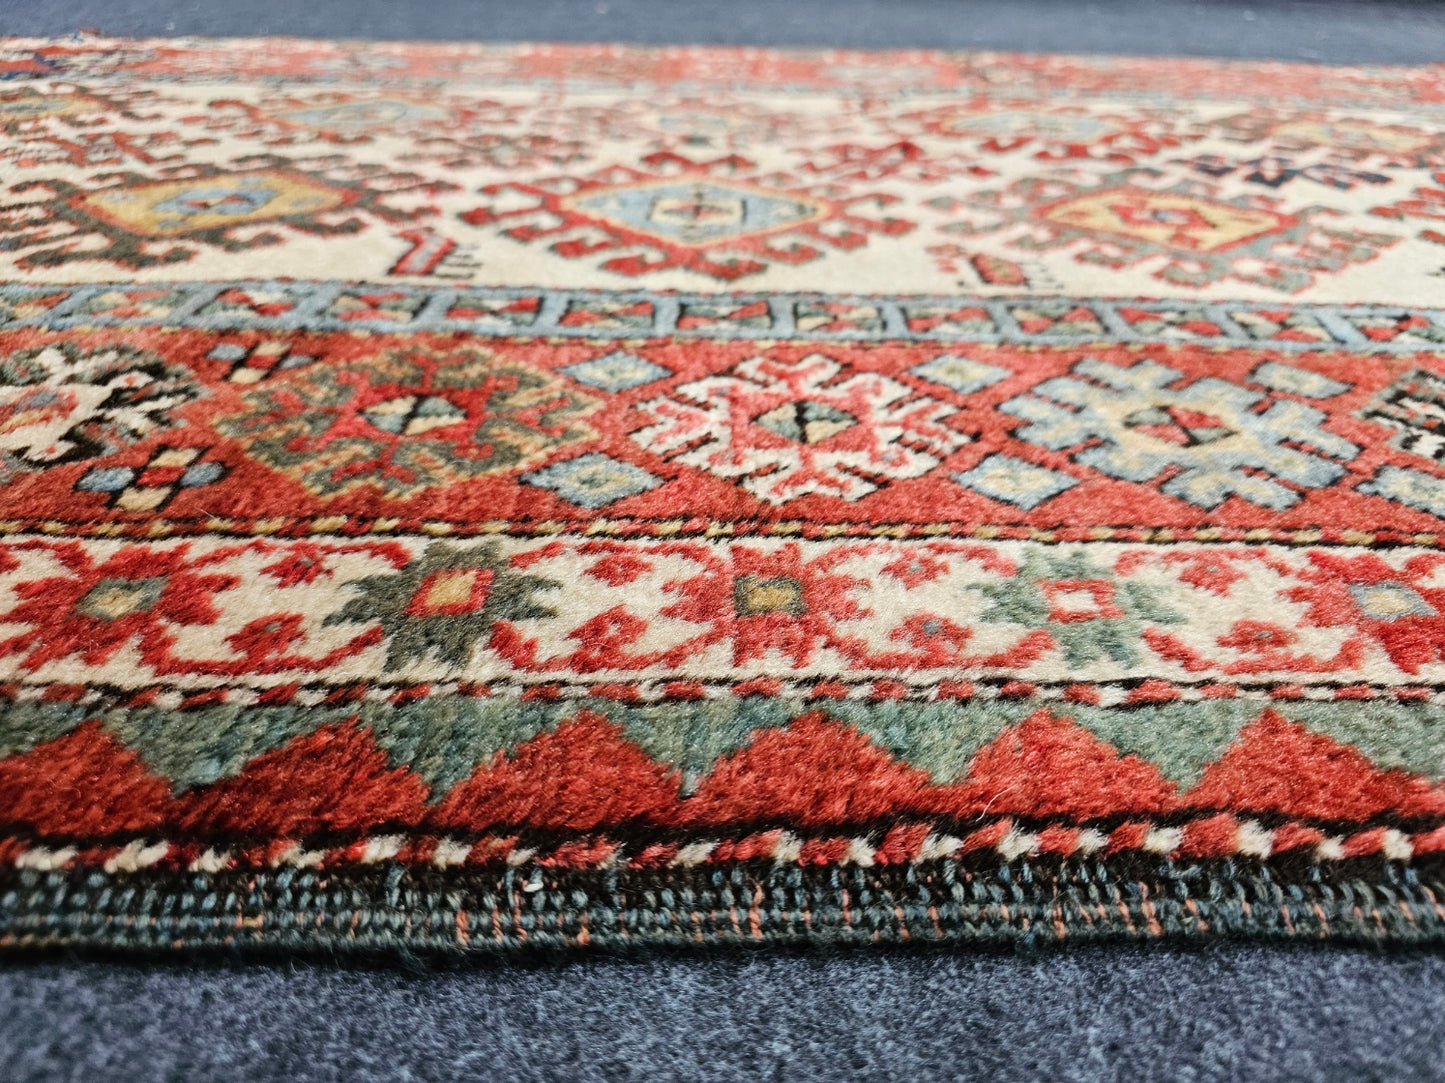 Collector Kazak Rug late 19th  condition full pile